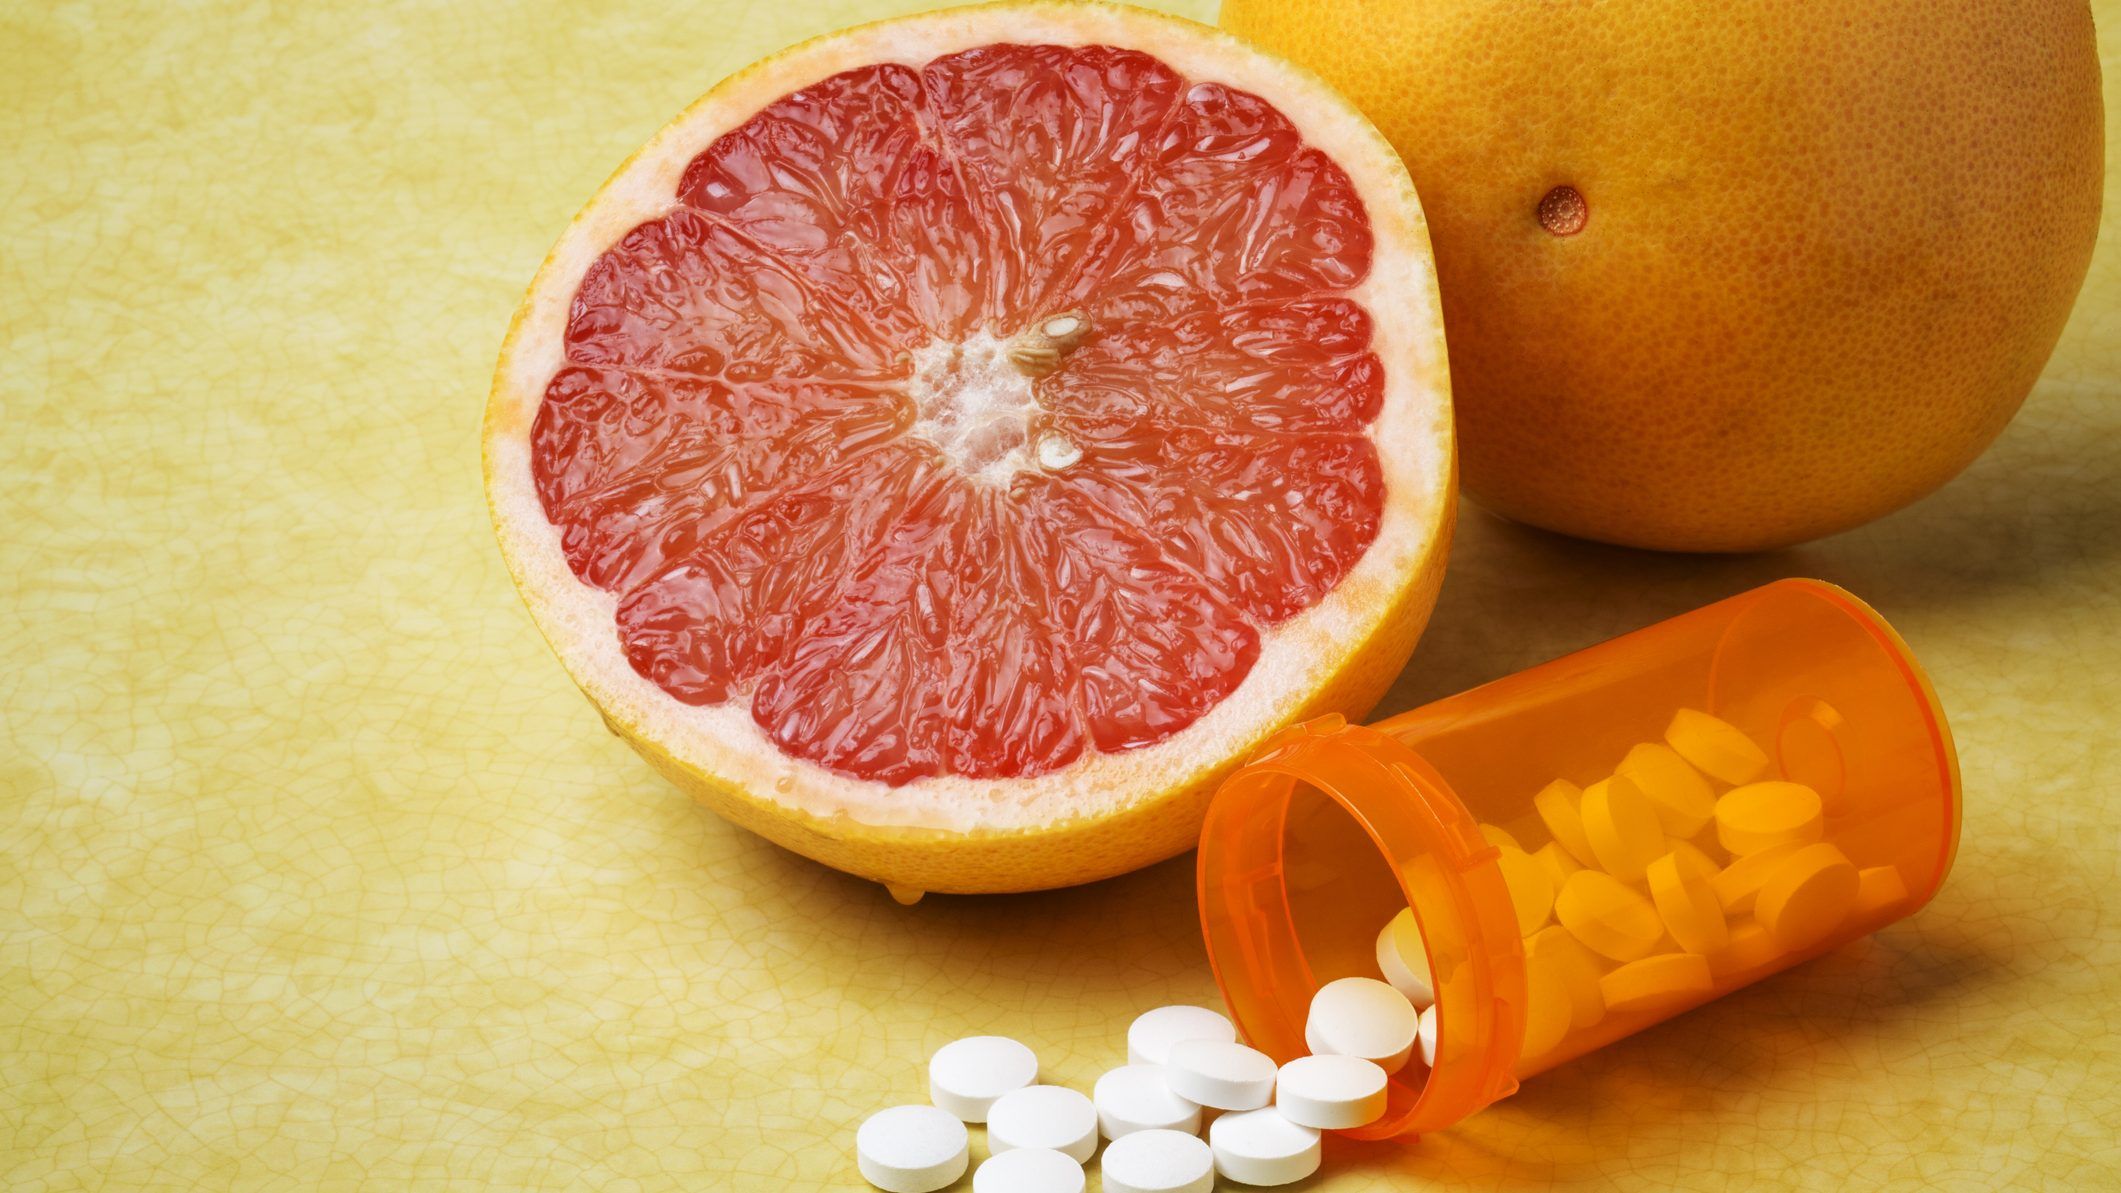 Advice: Why is grapefruit forbidden with some medications?